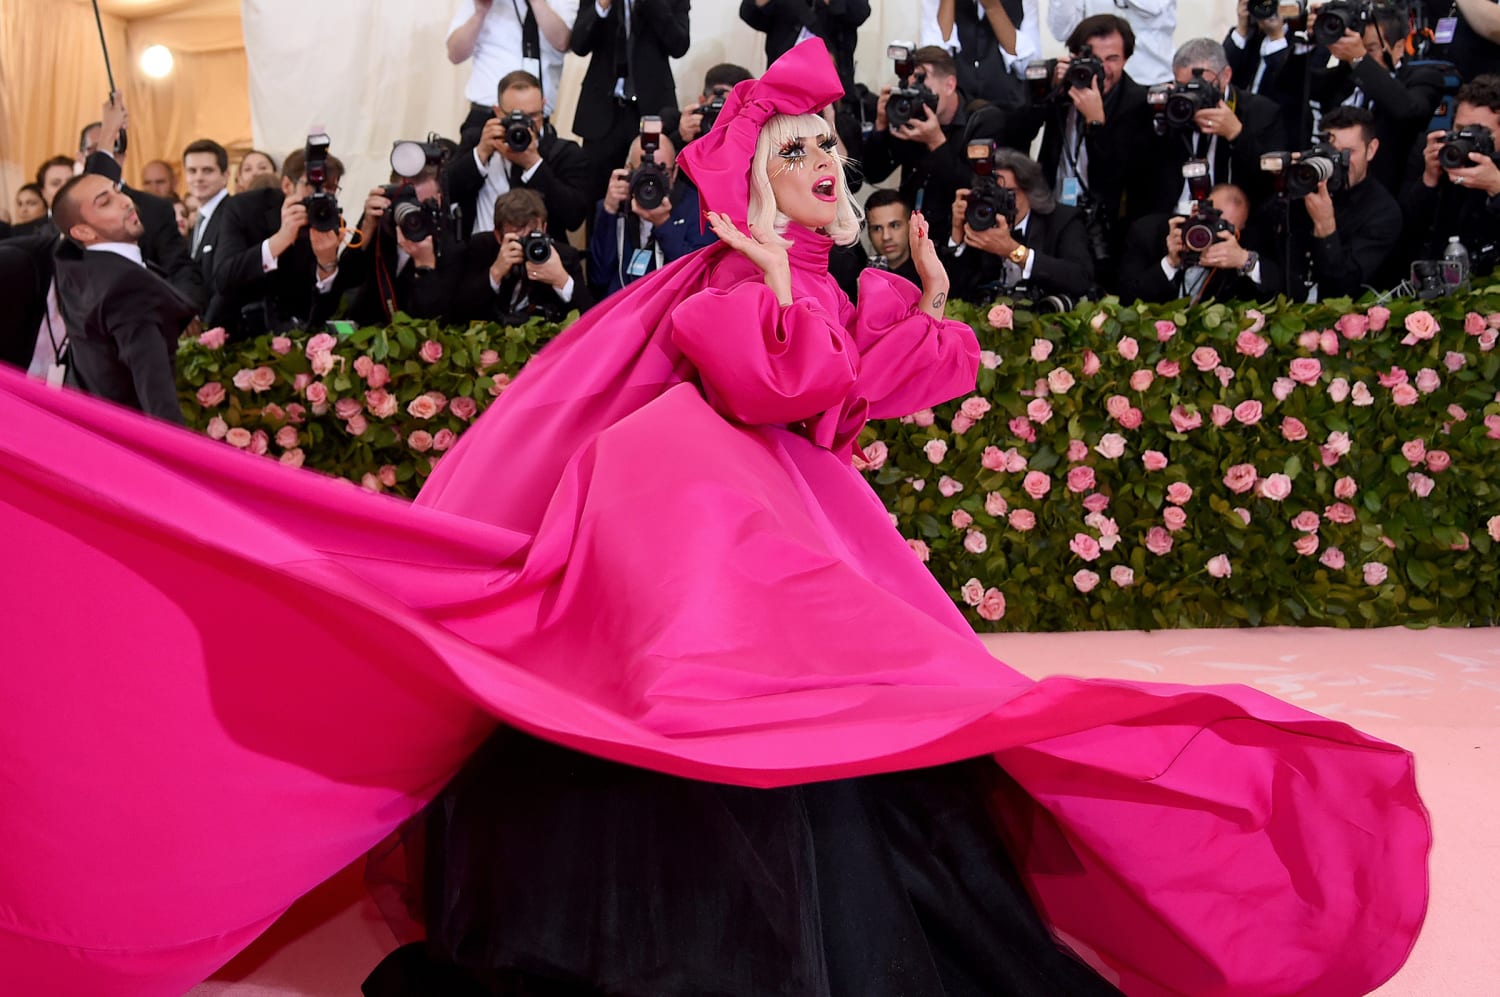 See Some of the Best Looks From the Virtual 2020 Met Gala Celebration